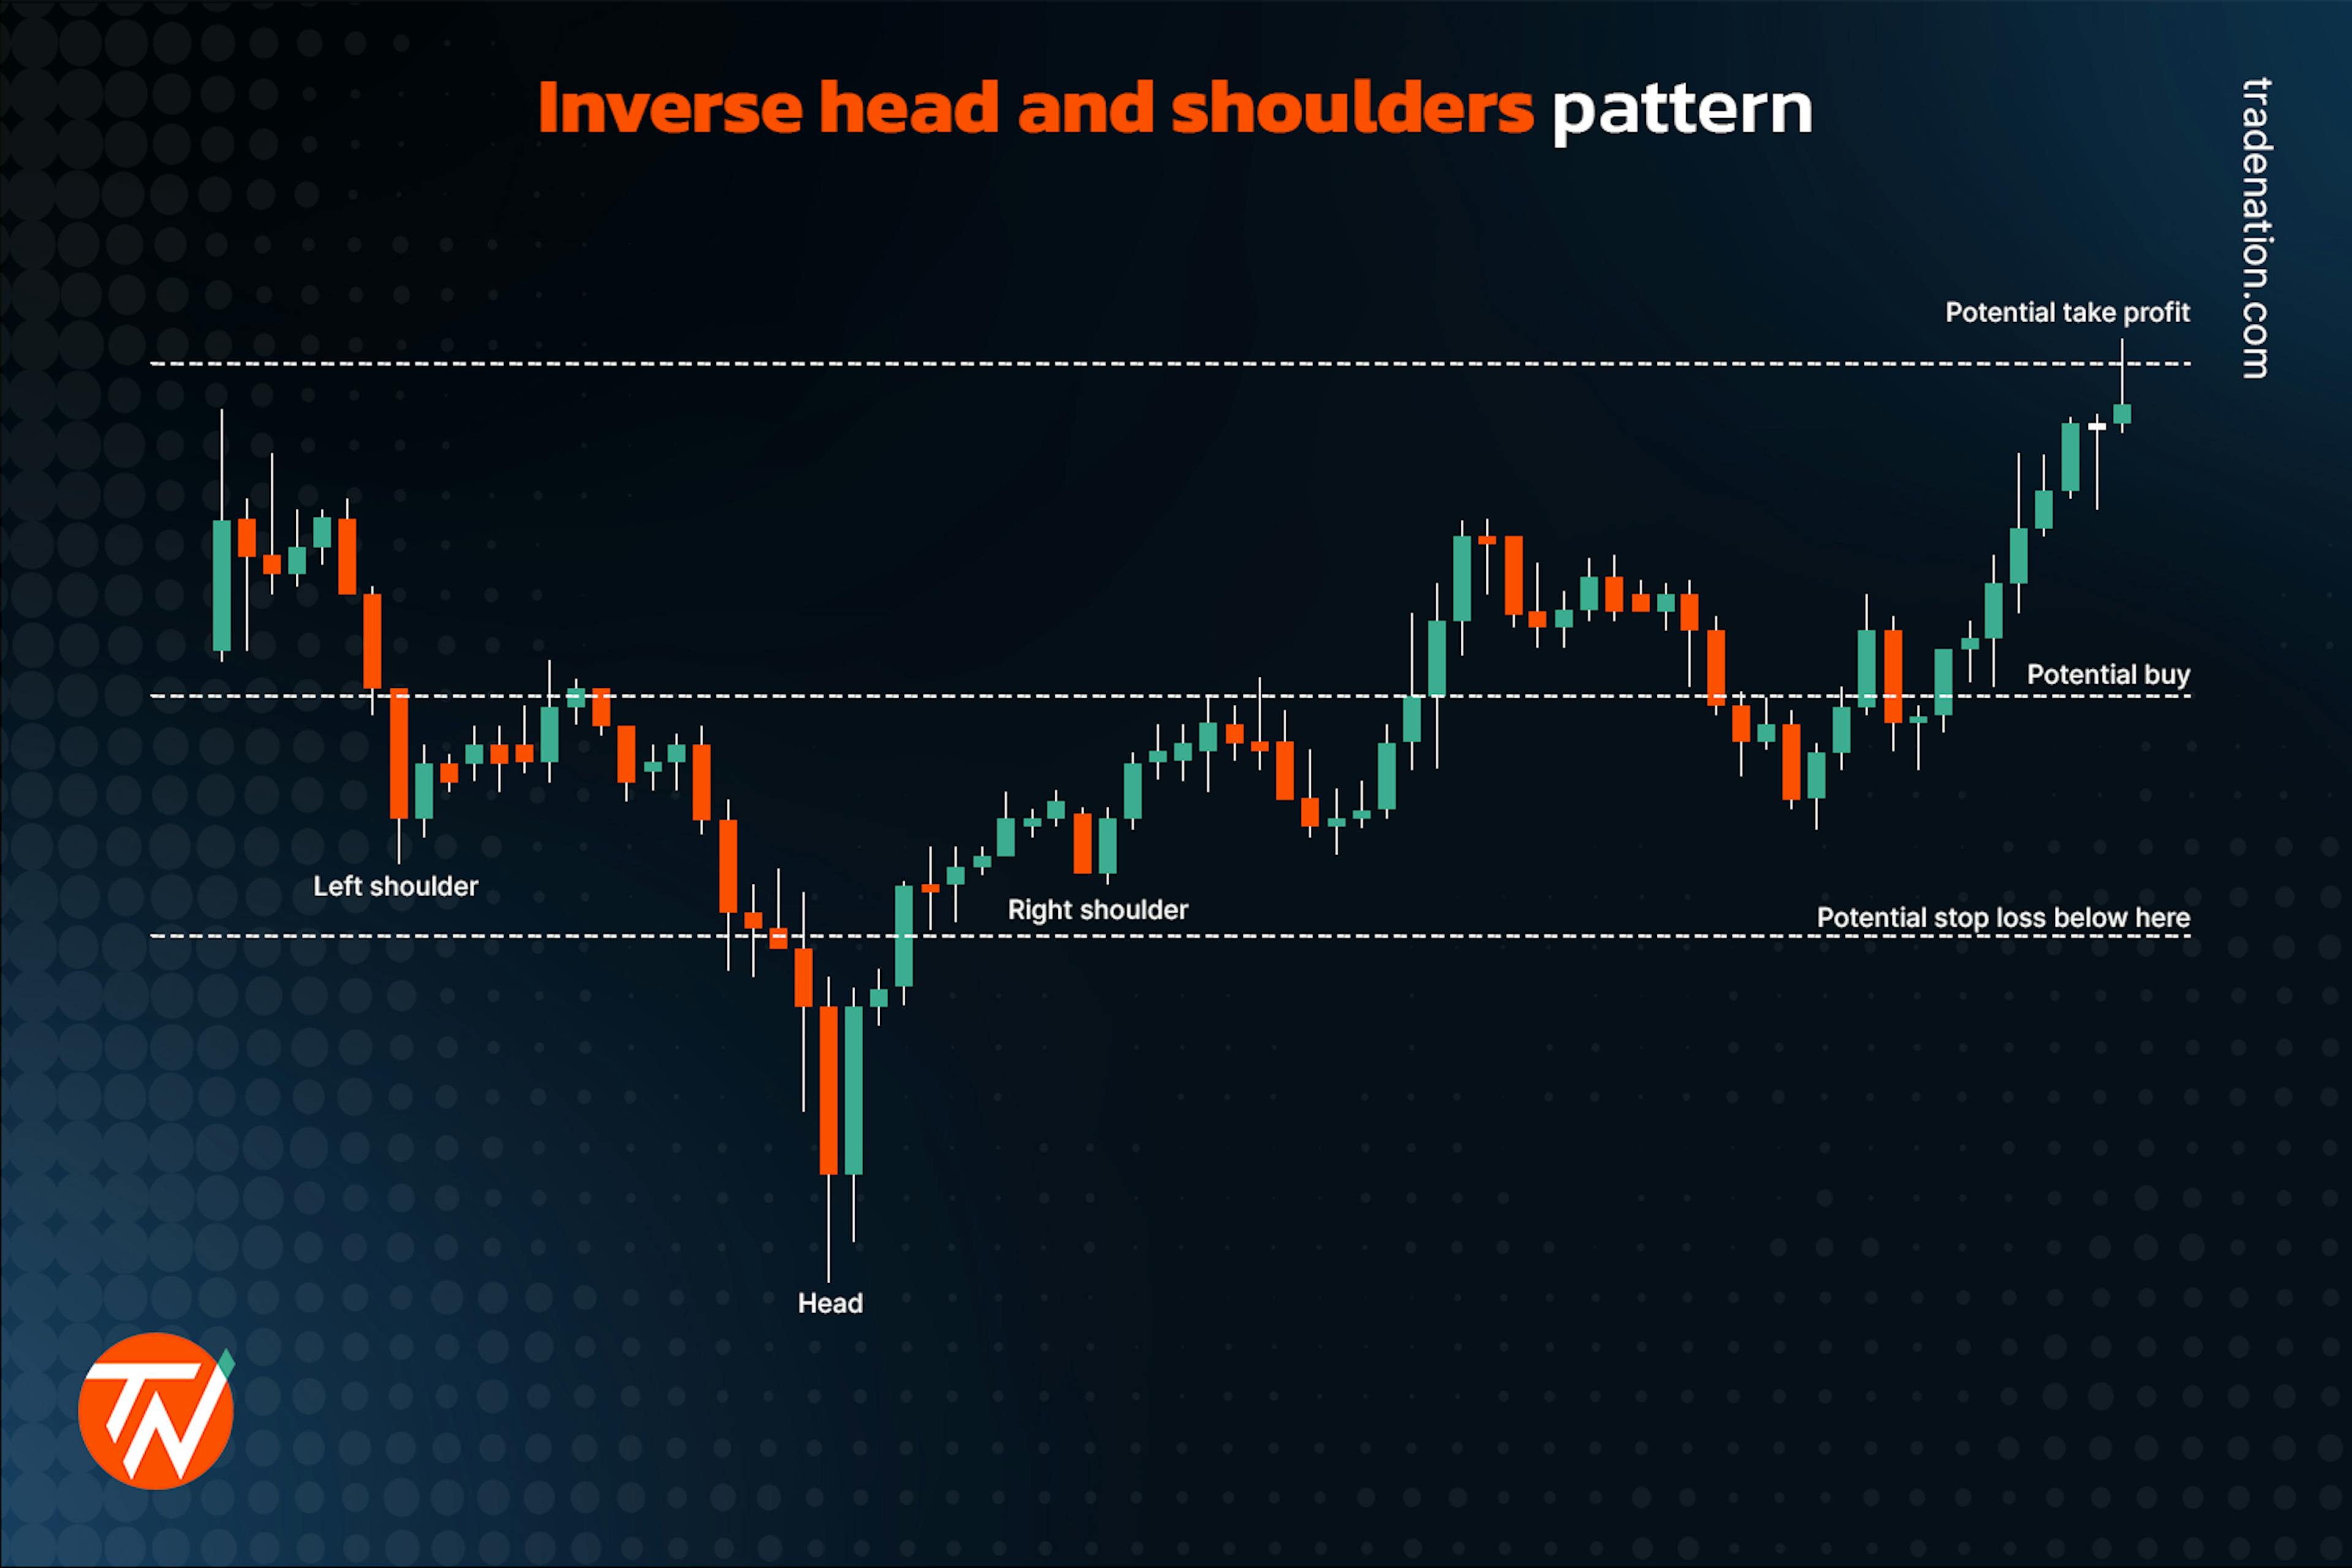 Trading using the inverse head and shoulders pattern